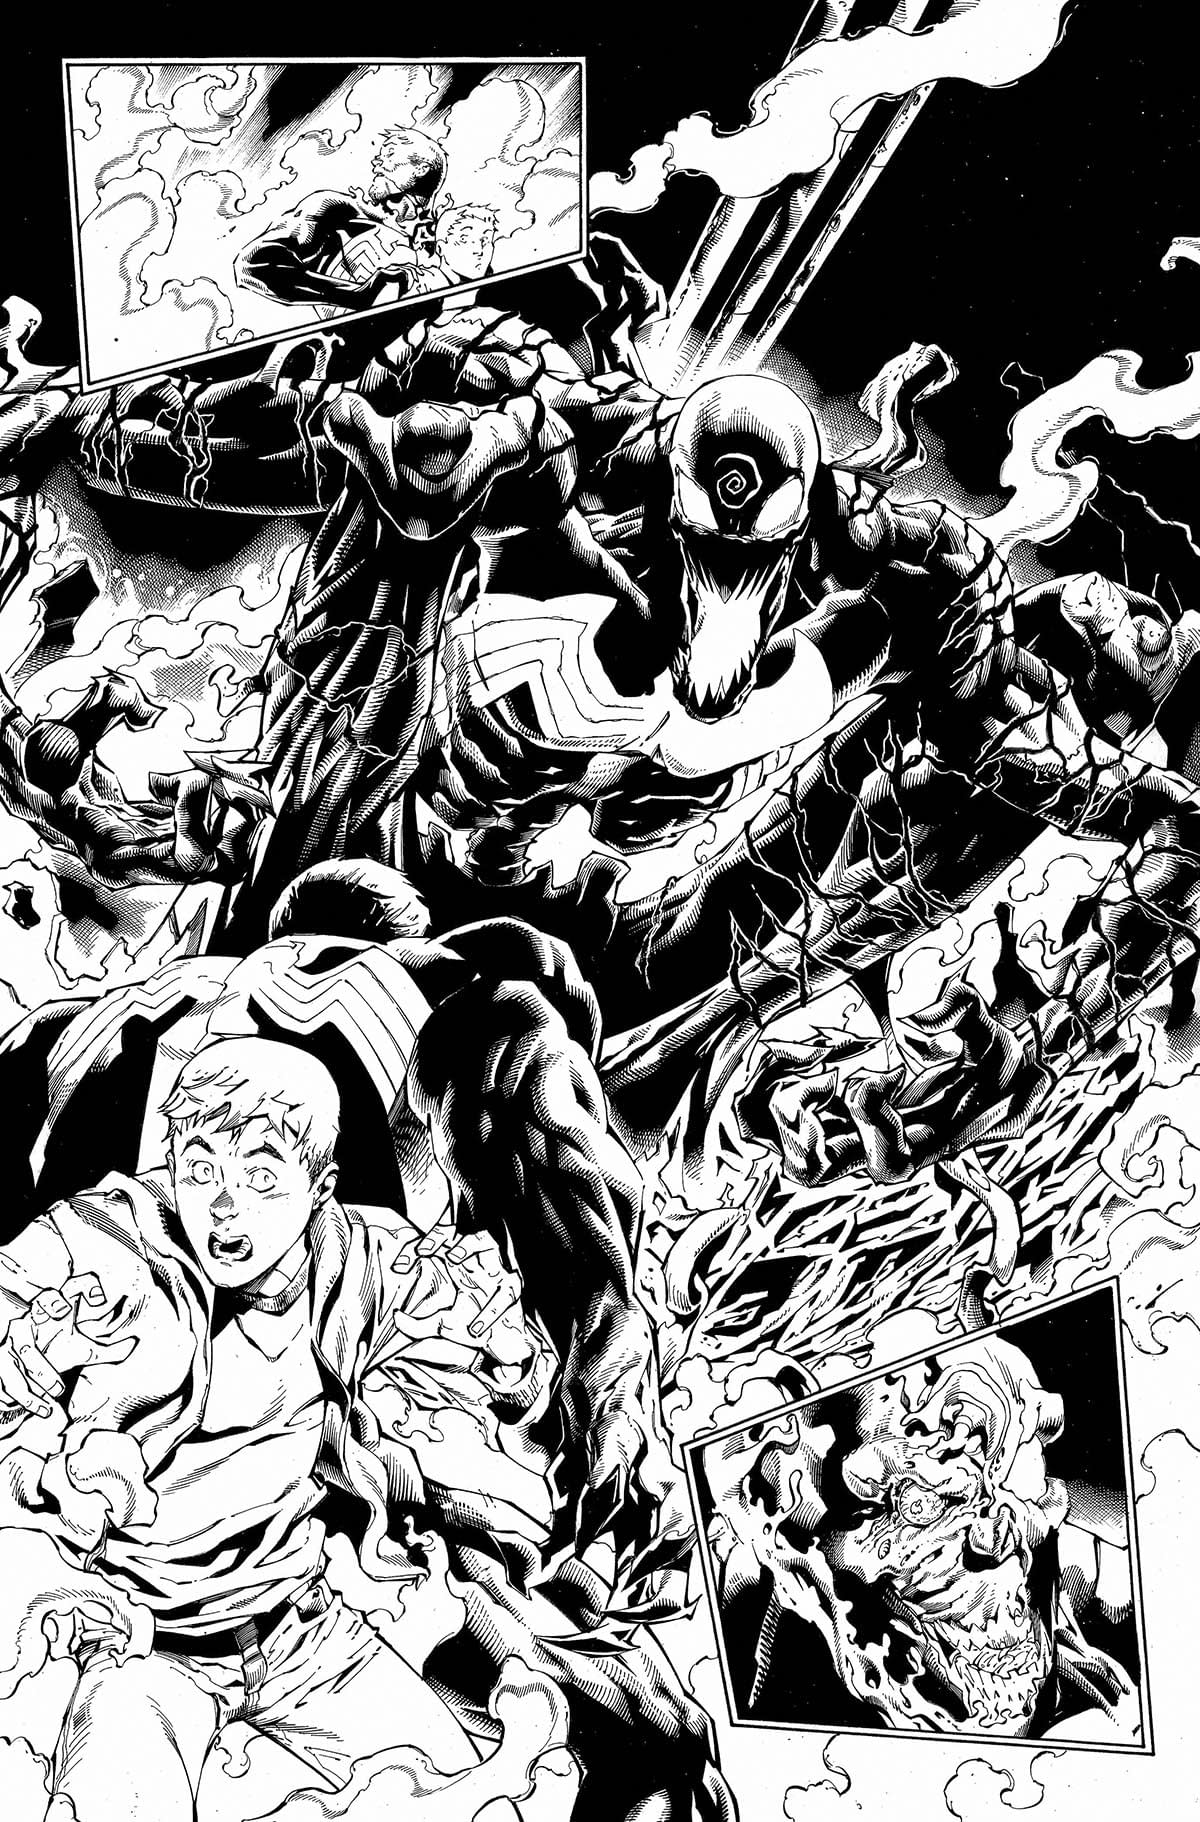 Absolute Carnage #1 Gets a Digital Director's Cut